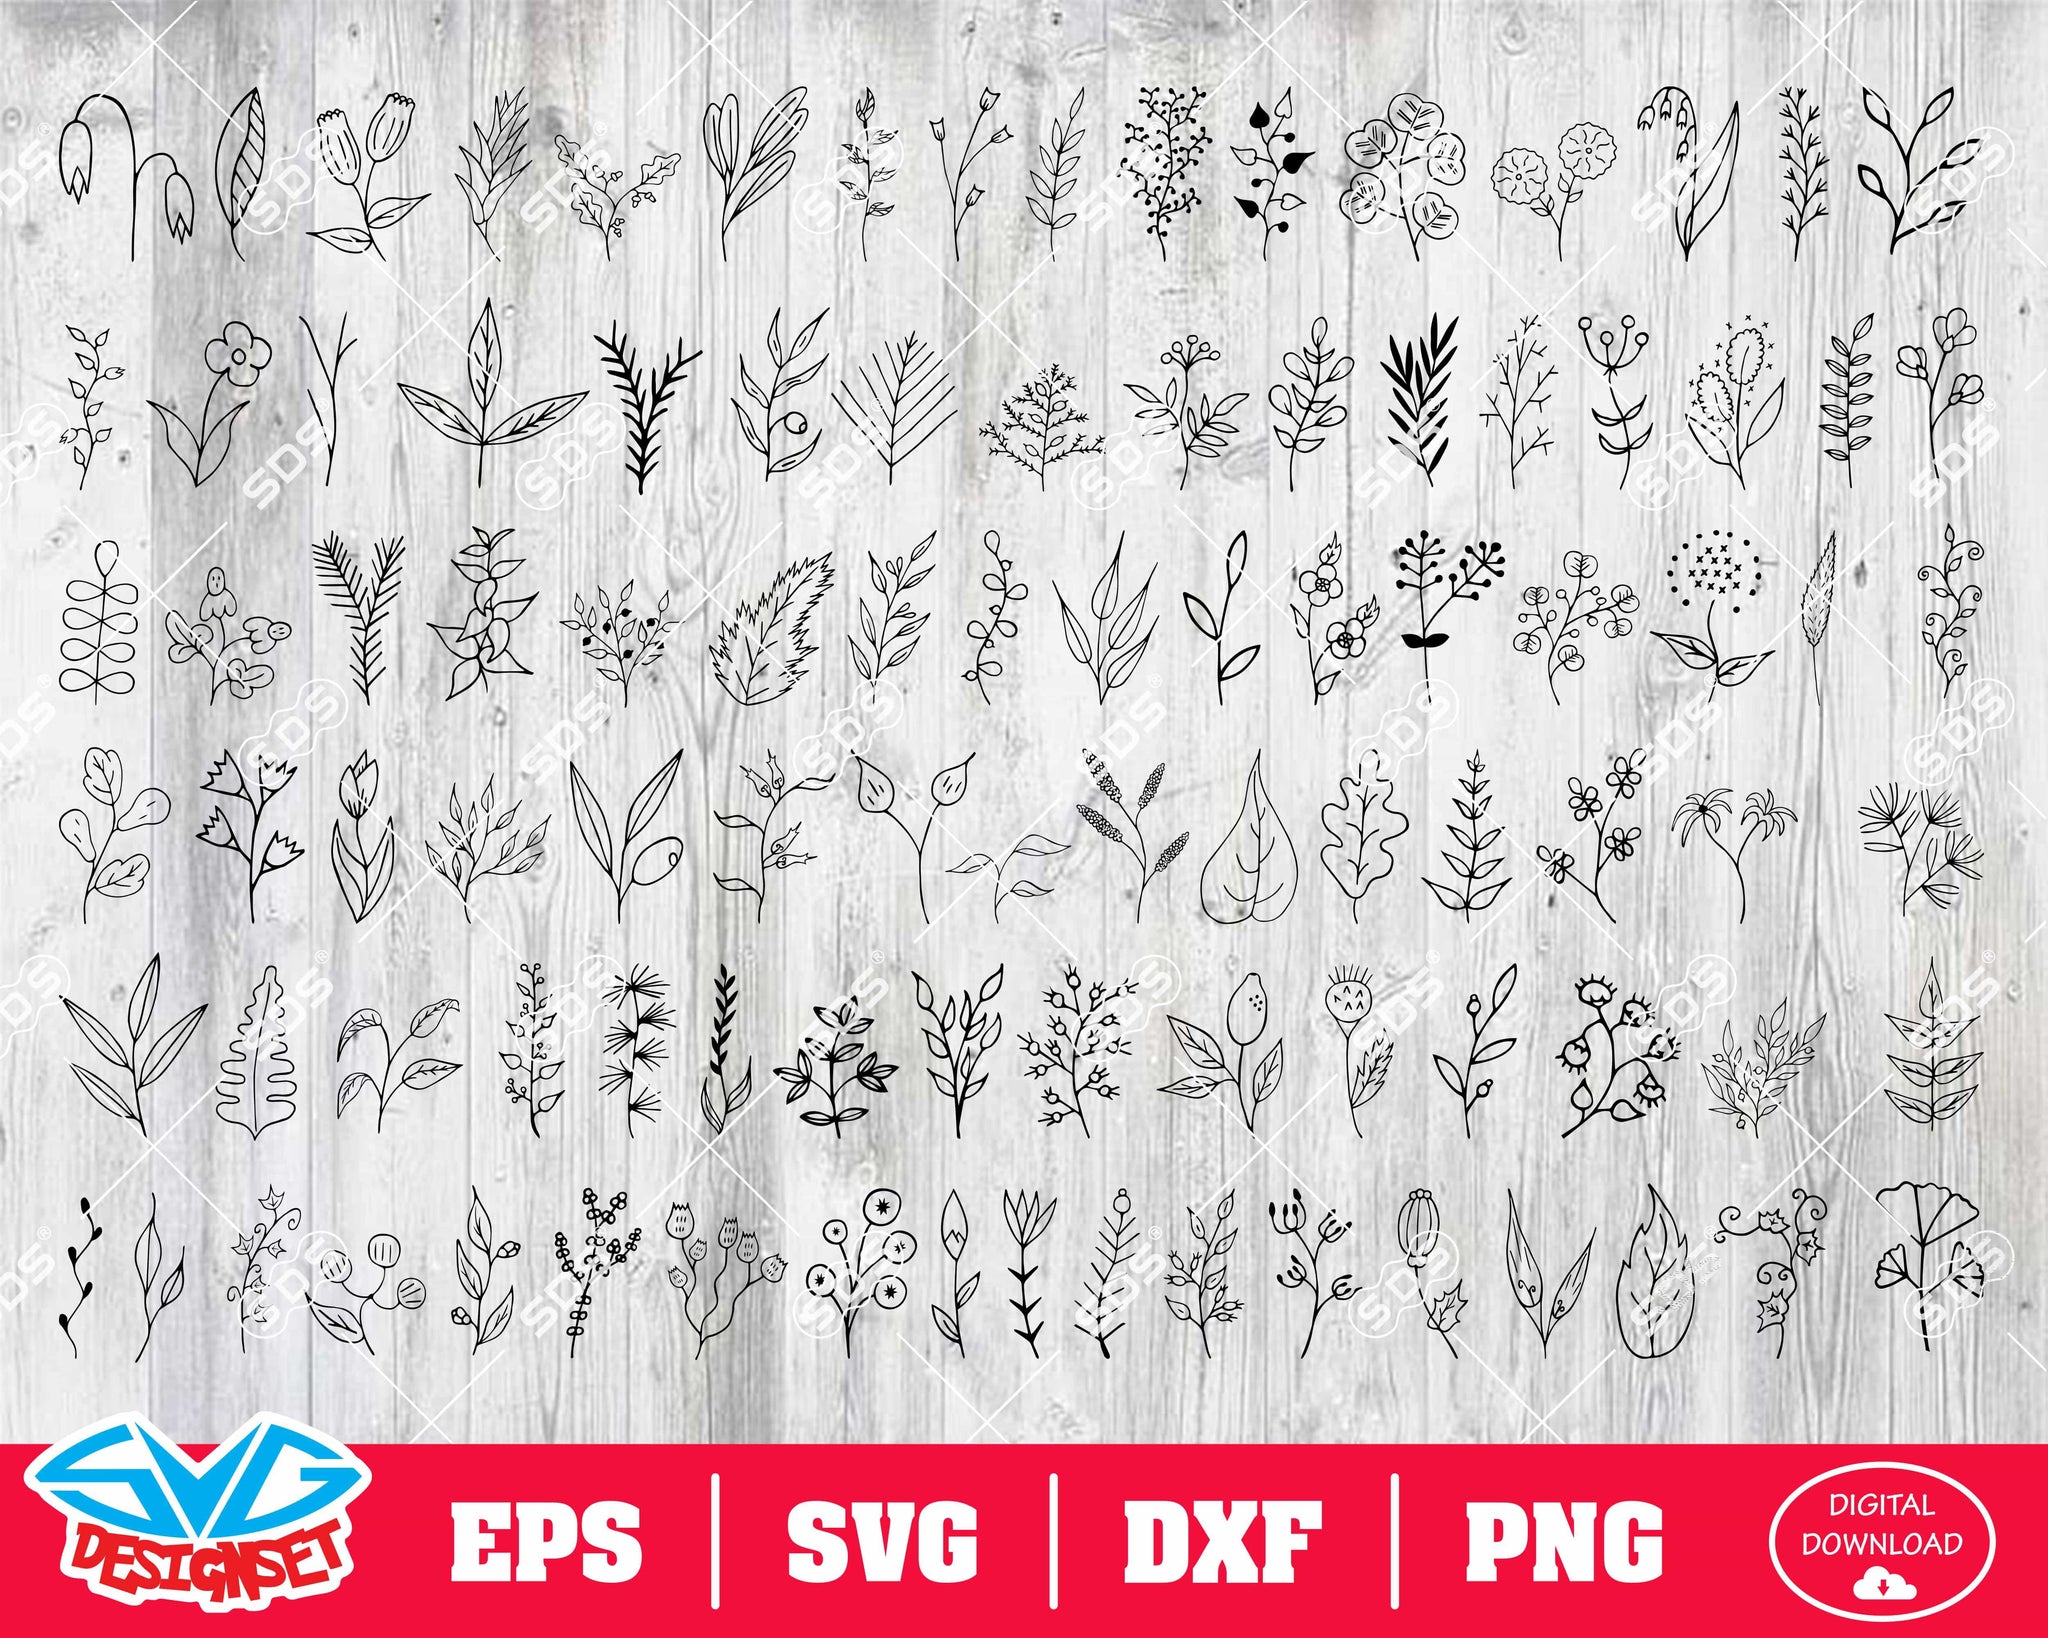 Floral Svg, Dxf, Eps, Png, Clipart, Silhouette and Cutfiles - SVGDesignSets